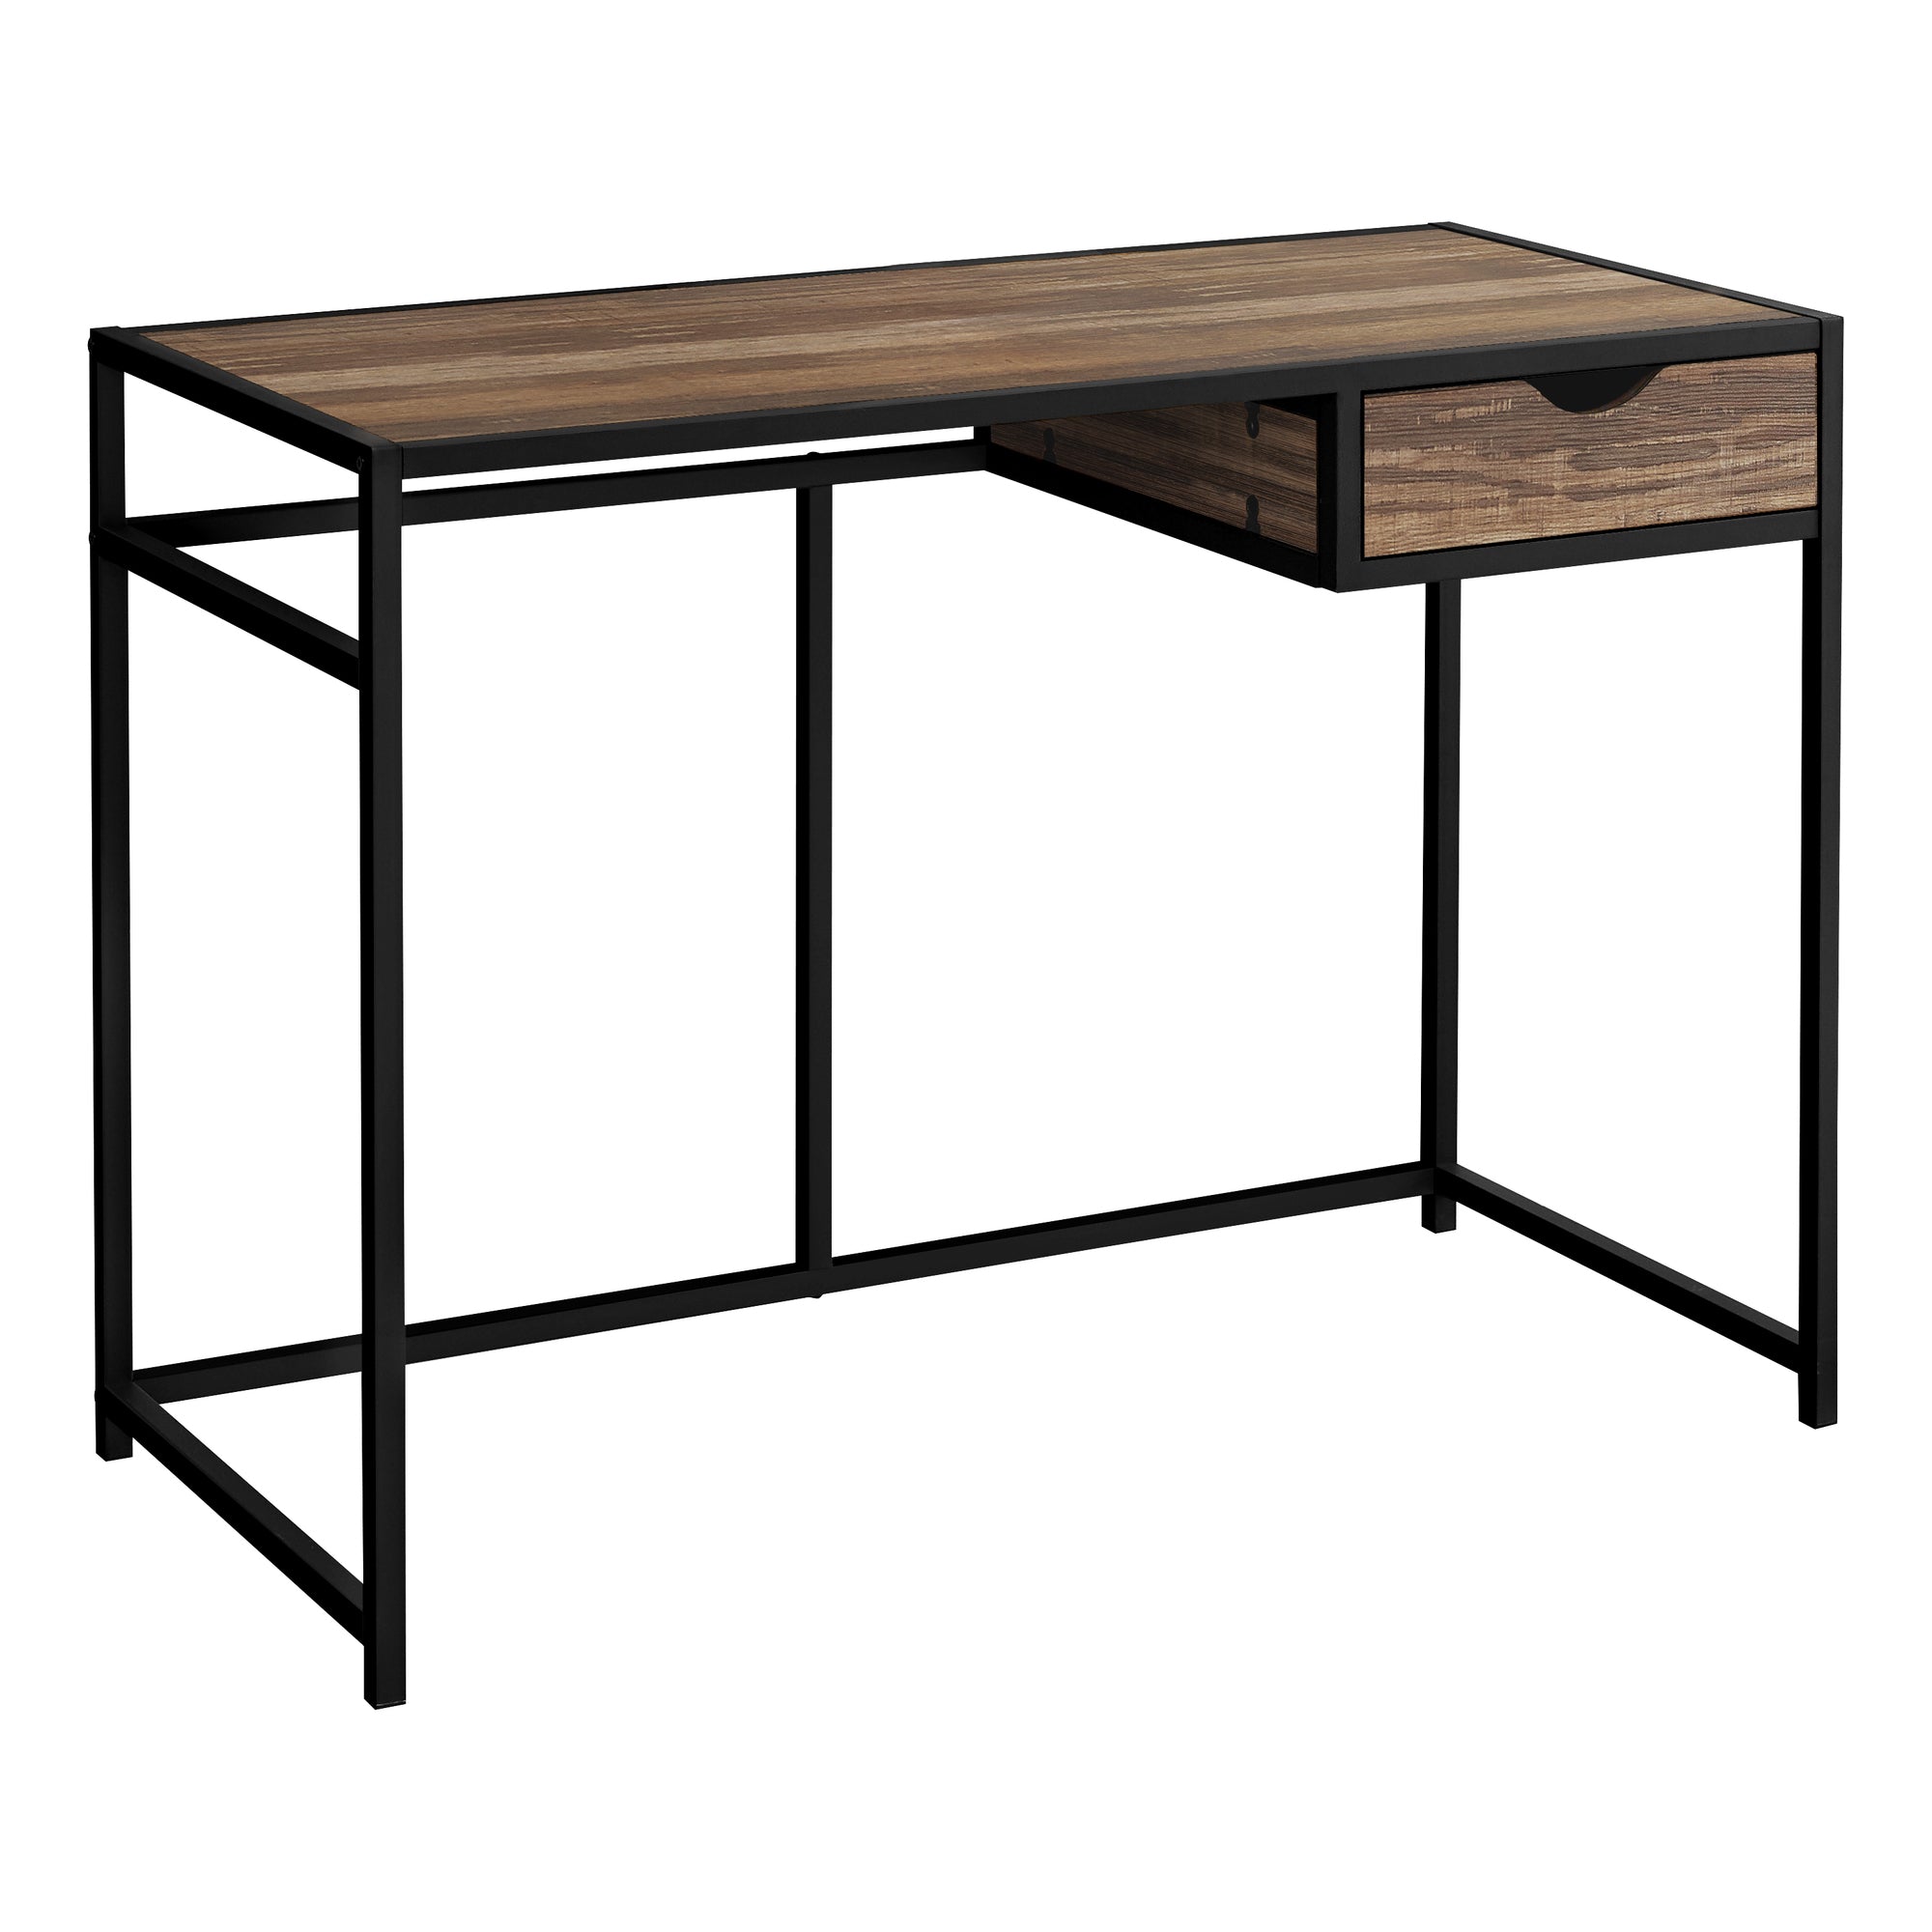 MN-967574    Computer Desk, Home Office, Laptop, Storage Drawers, 42"L, Metal, Laminate, Brown Reclaimed Wood Look, Black, Contemporary, Industrial, Modern